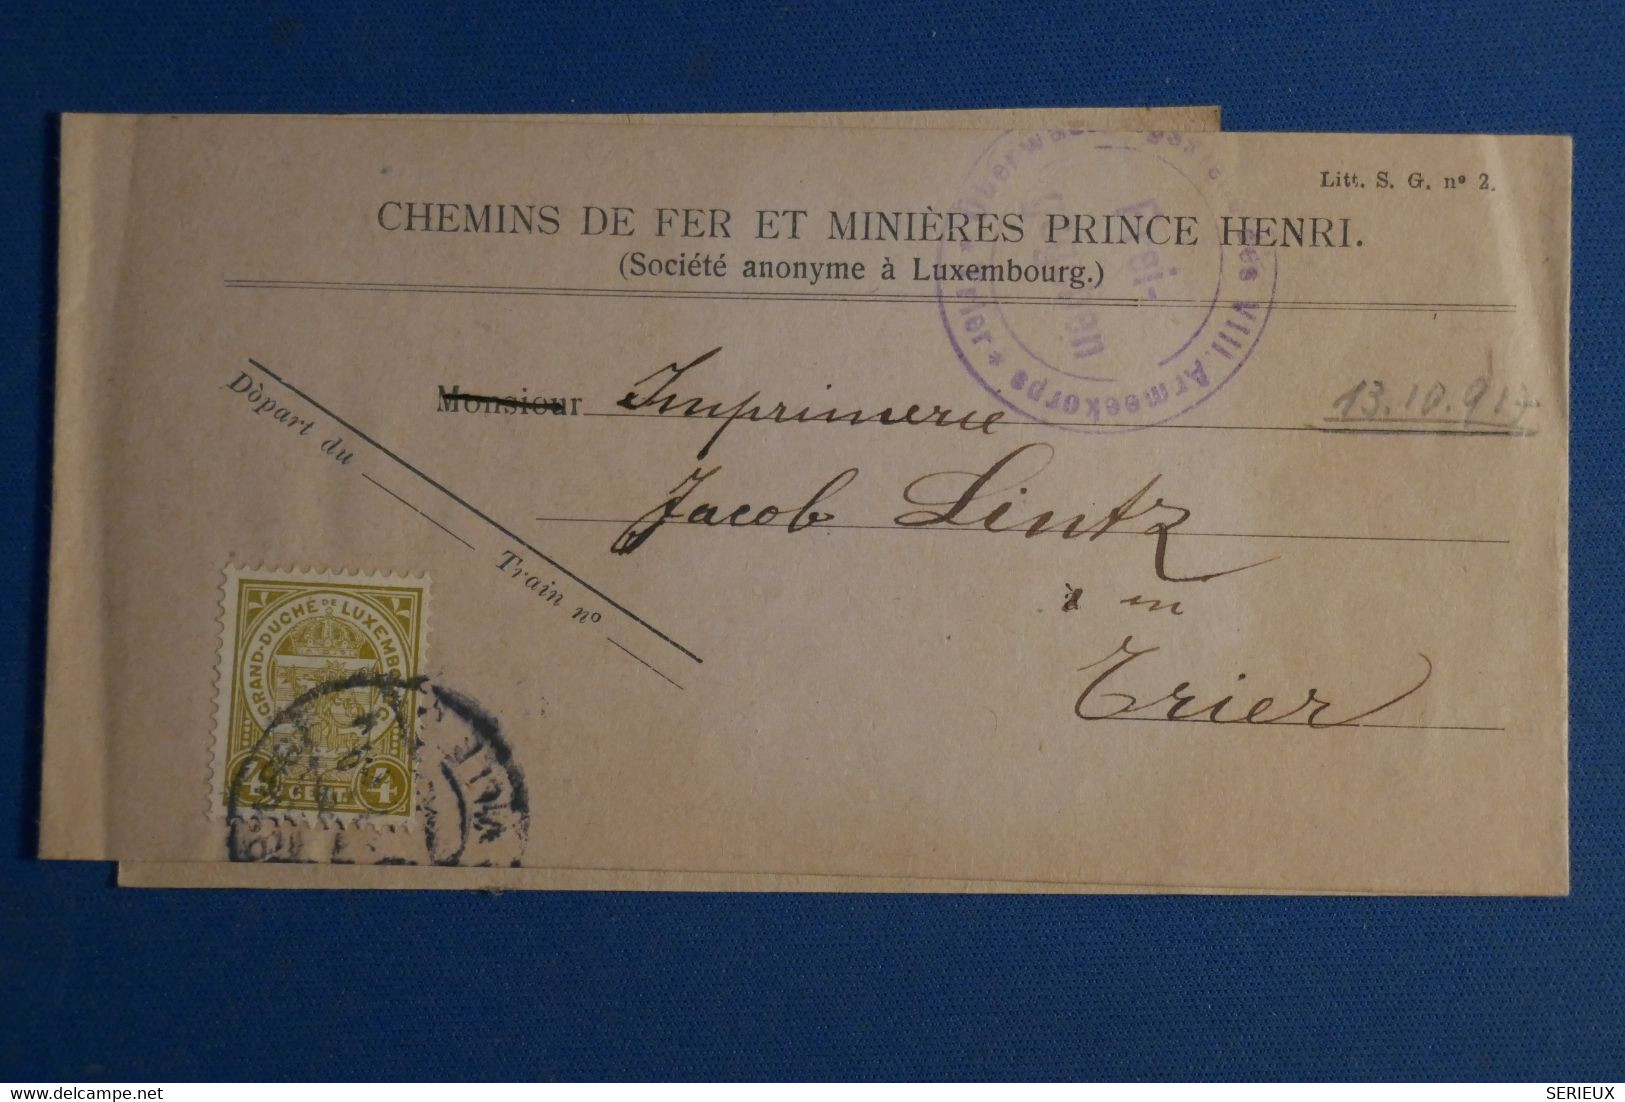 AK15 LUXEMBOURG  BANDE DE JOURNAL  1891  TRIER  ++ + AFFRANCH. INTERESSANT - 1895 Adolphe Right-hand Side